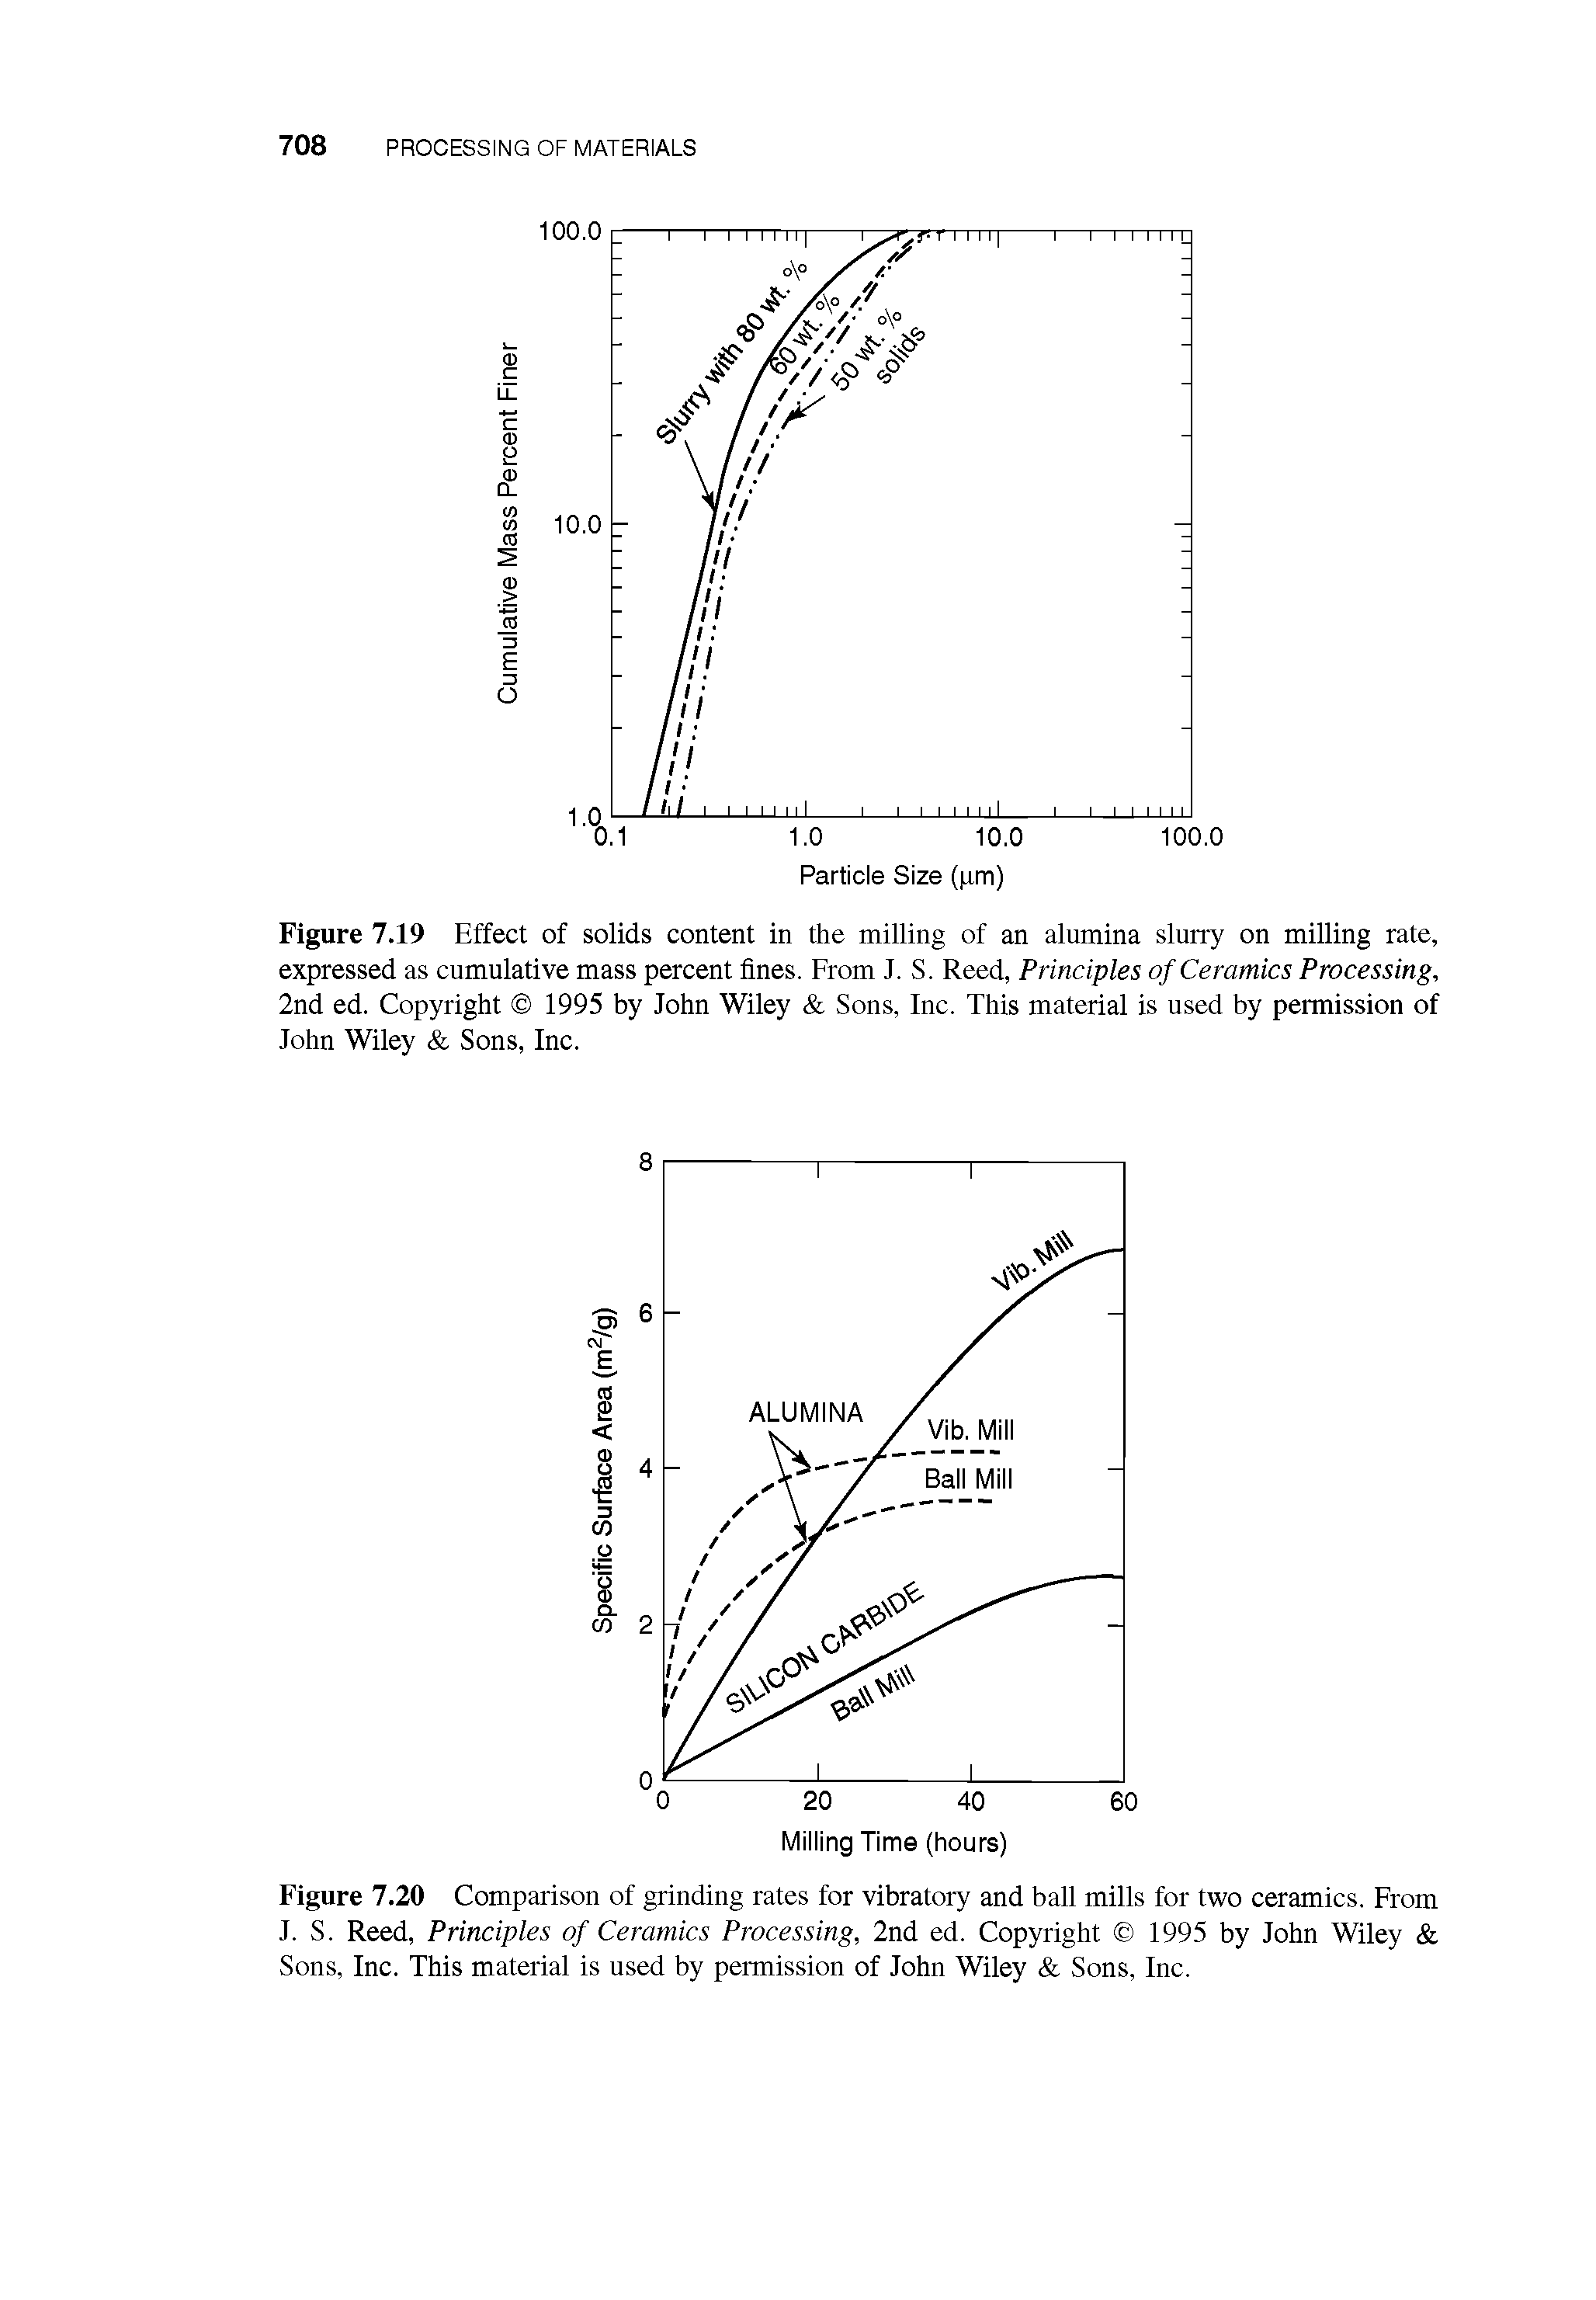 Figure 7.19 Effect of solids content in the milling of an alumina slurry on milling rate, expressed as cumulative mass percent fines. From J. S. Reed, Principles of Ceramics Processing, 2nd ed. Copyright 1995 by John Wiley Sons, Inc. This material is used by permission of John Wiley Sons, Inc.